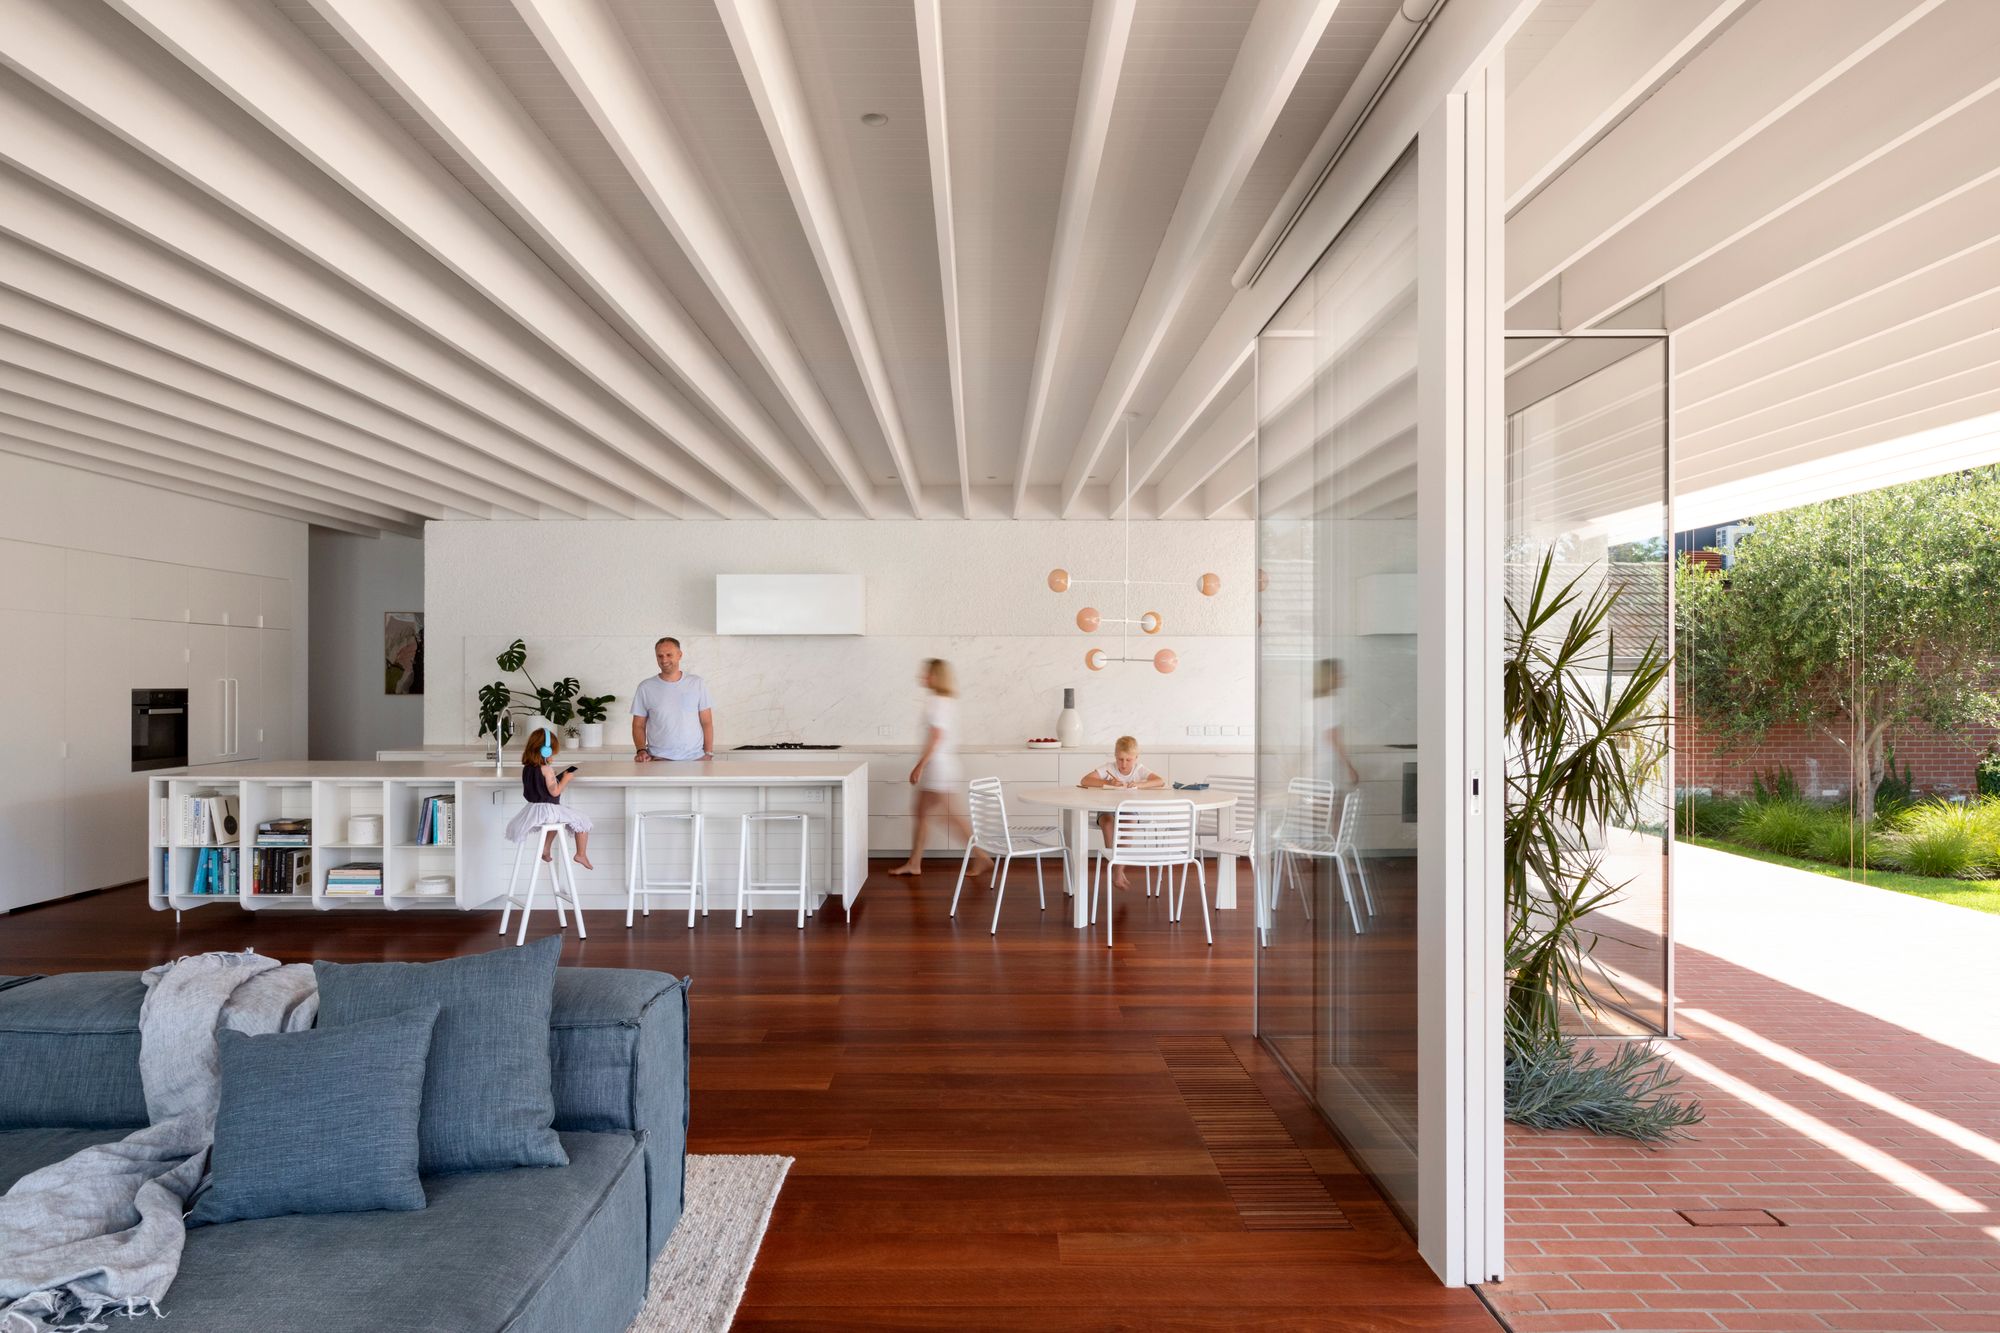 Elwood House by AM Architecture showing interior of new living spaces with exposed beams